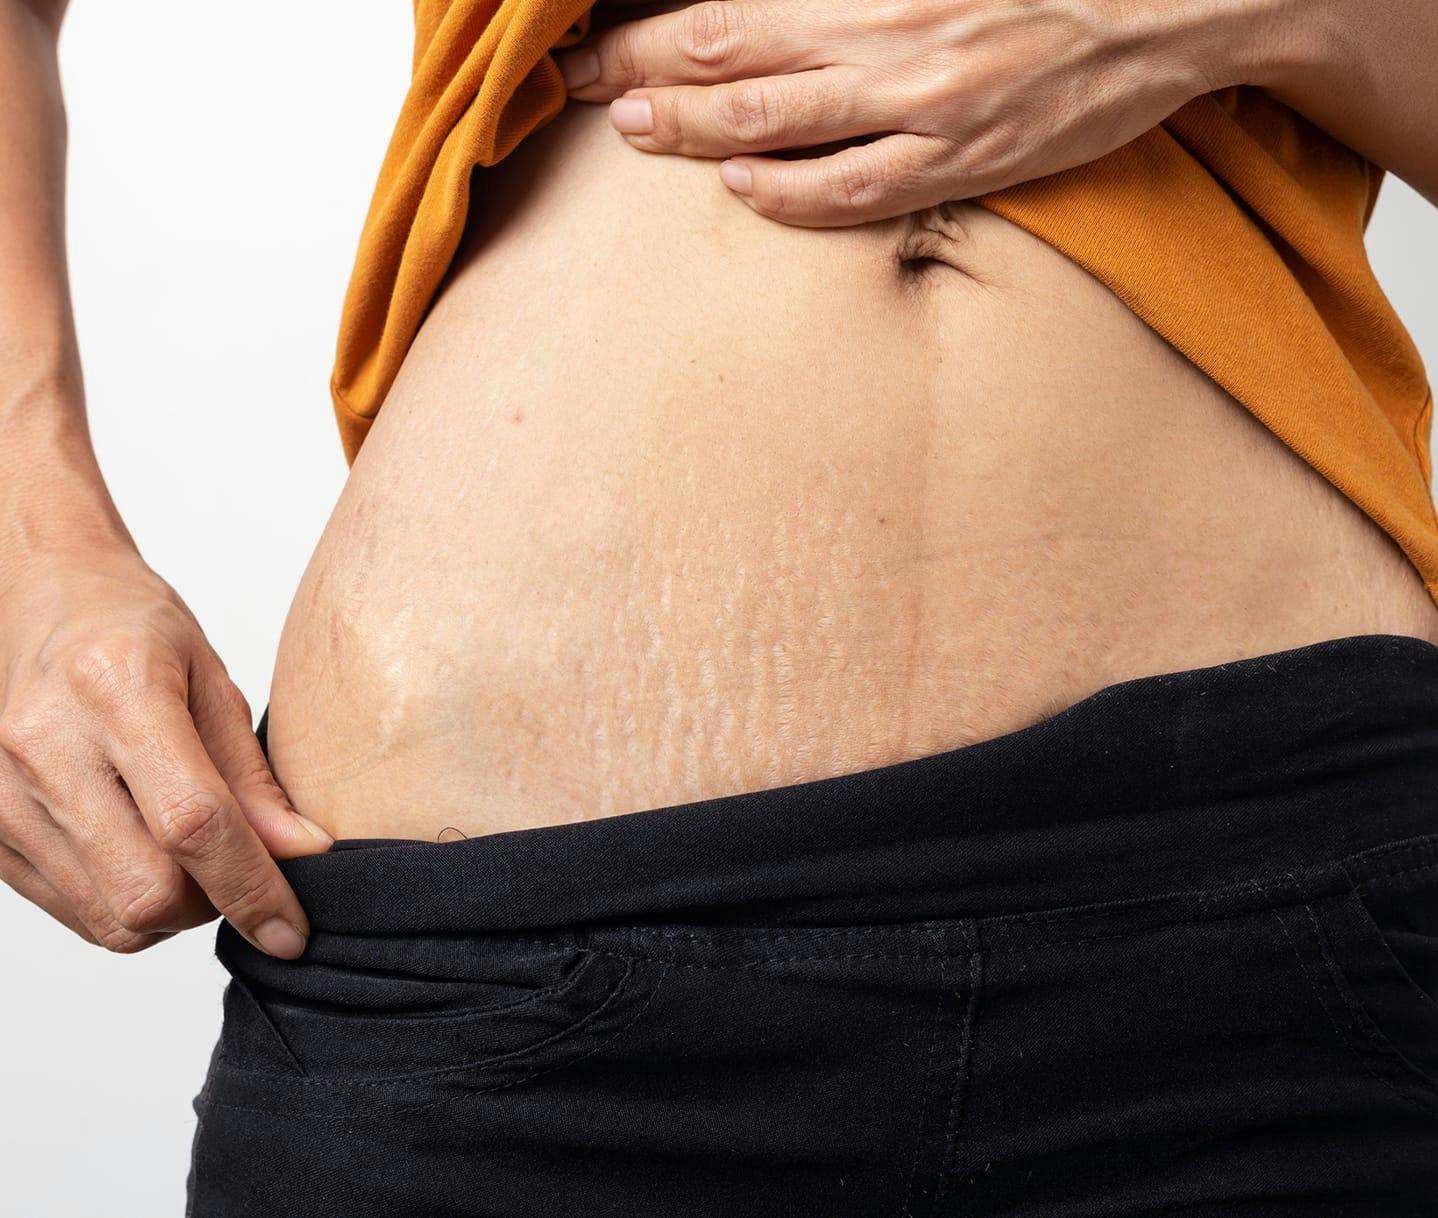 Does tummy tuck remove stretch marks